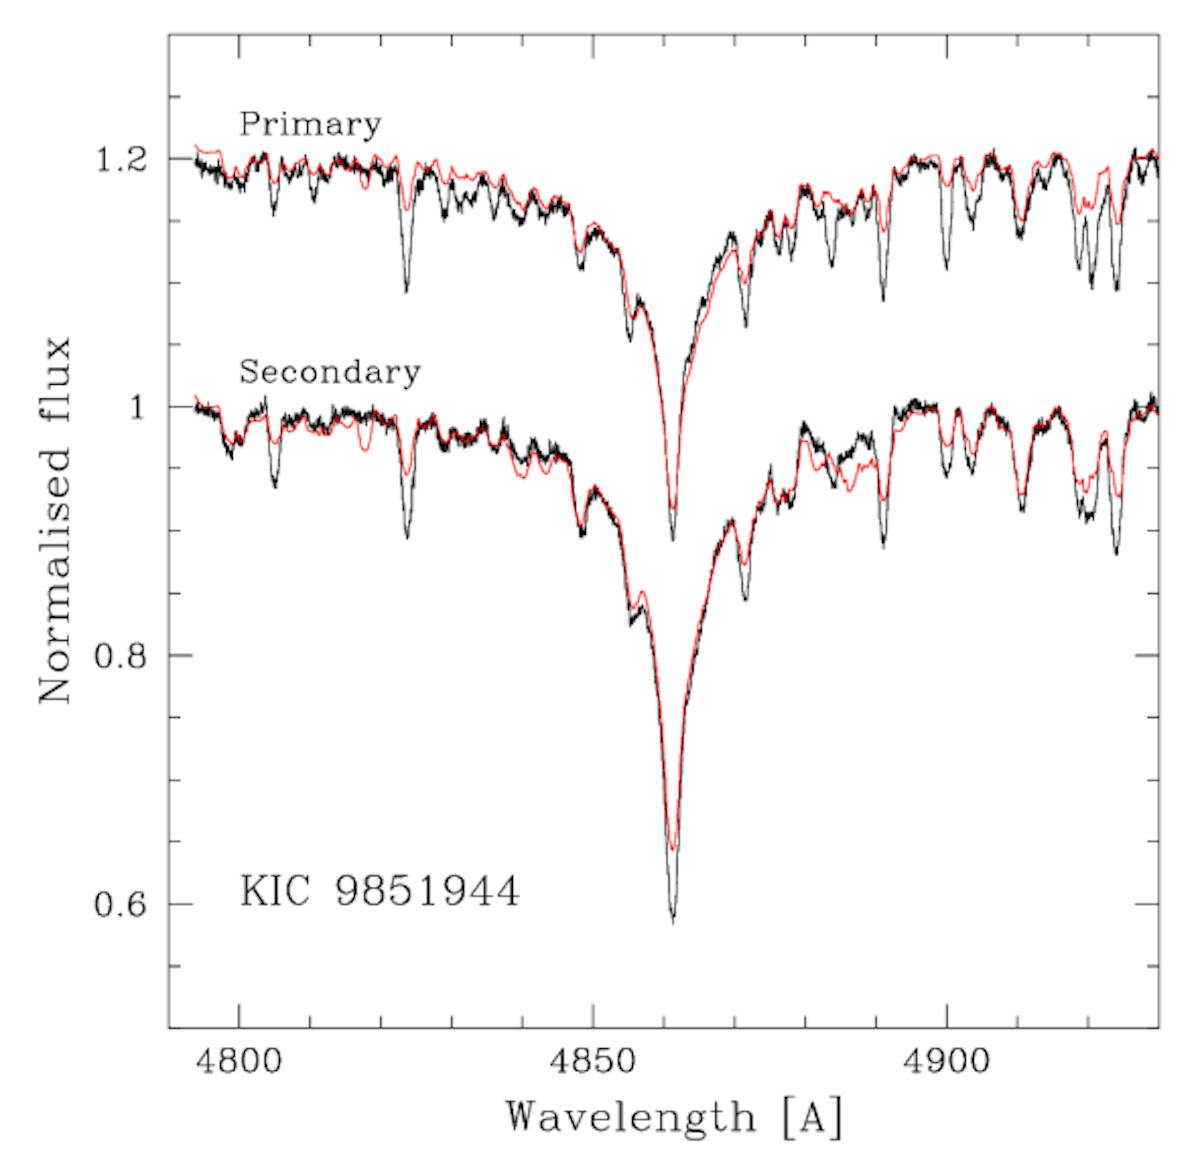 Figure 6. Optimal fitting of the wings for Hβ lines in disentangled spectra of binary system KIC 9851944. The spectral lines of metals were masked during the fitting, so were not included in calculations of the merit function. The disentangled spectra are shown in black, and the optimal fits in red.